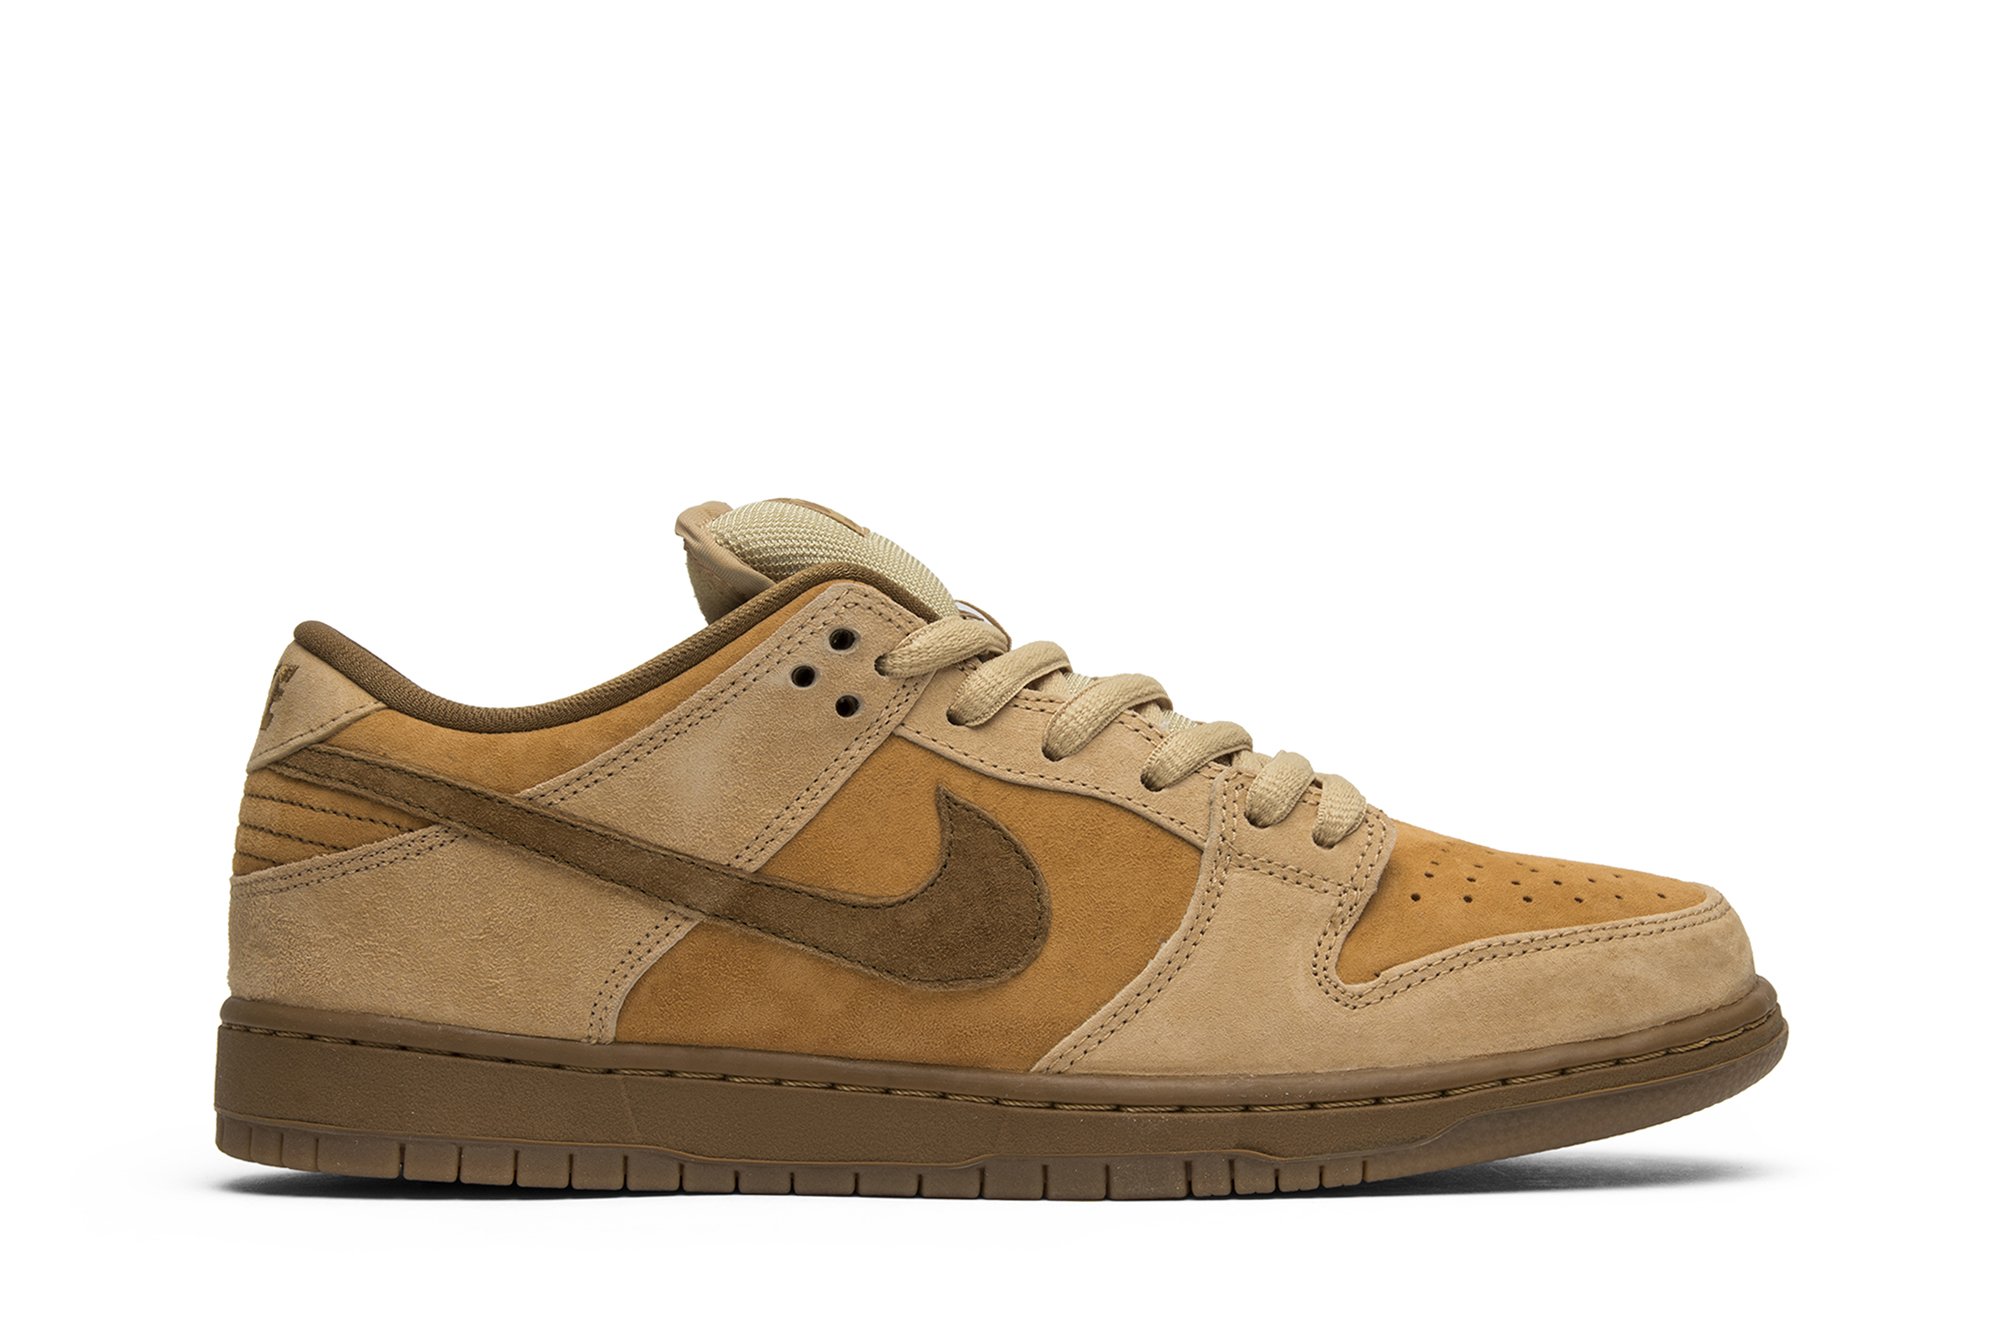 nikesbNIKE SB DUNK LOW QS REESE FORBES WHEAT